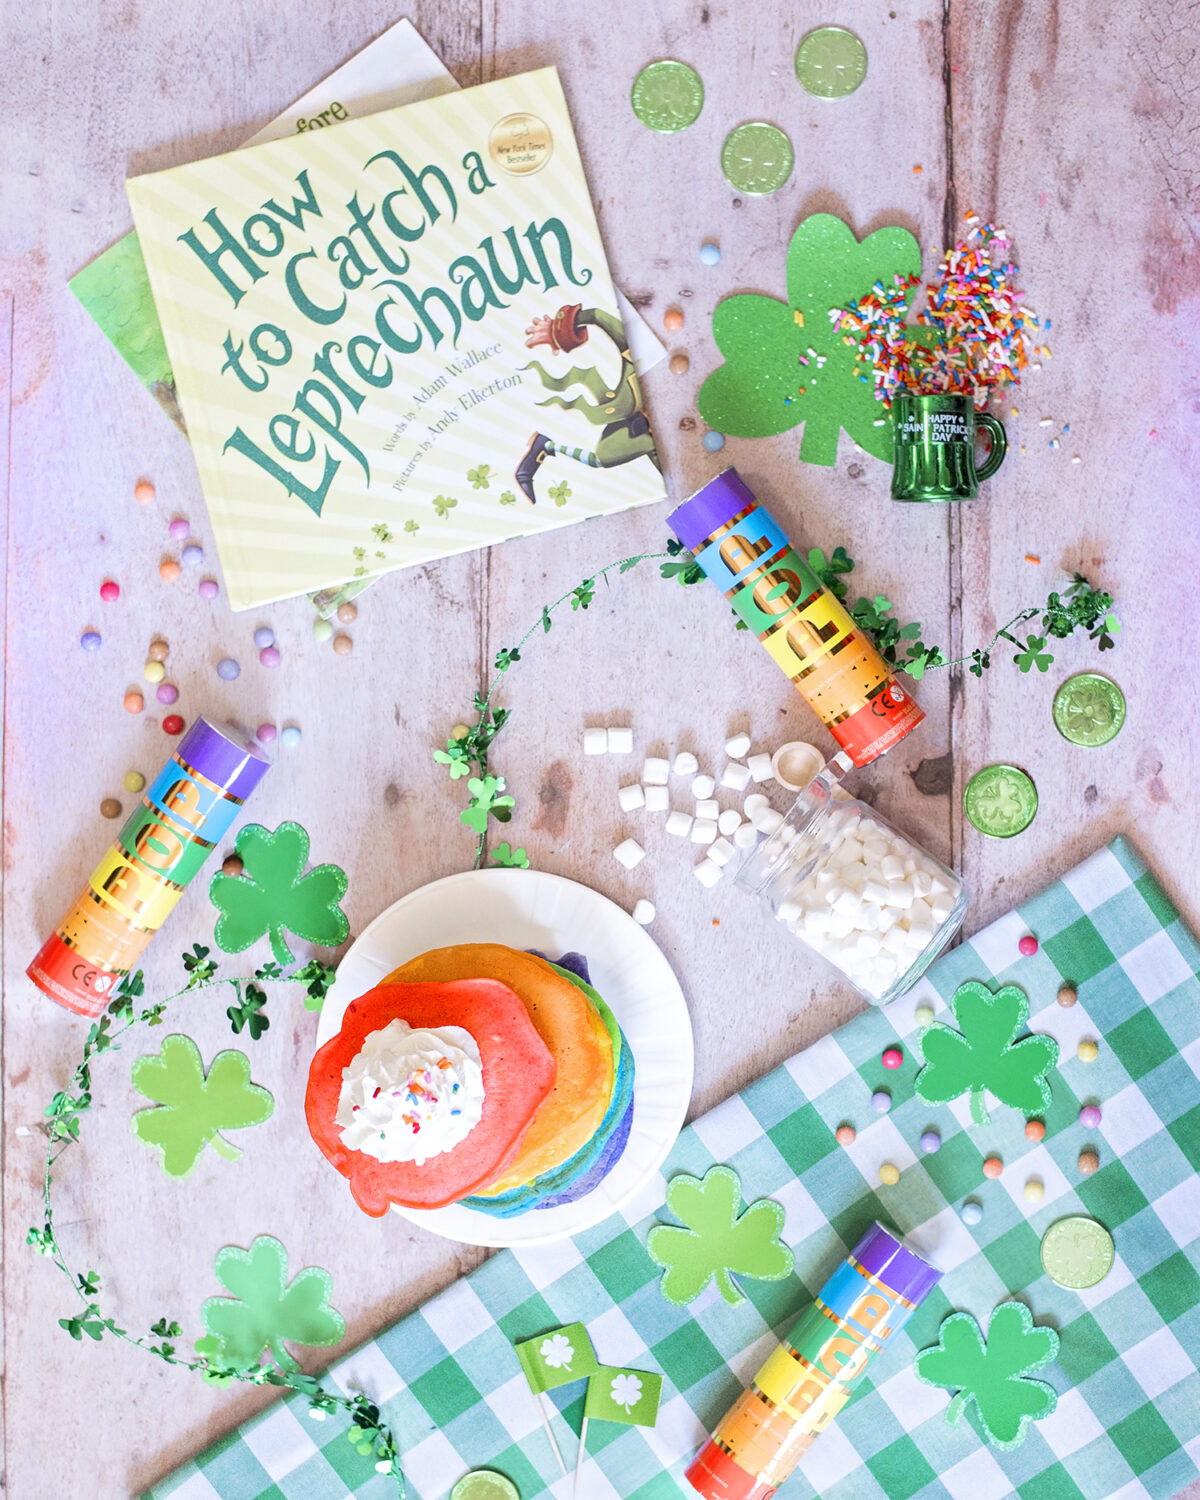 Fun St. Patrick's Breakfast Ideas for kids with rainbow pancakes and shamrock decorations.  Our top ten leprechaun pranks.